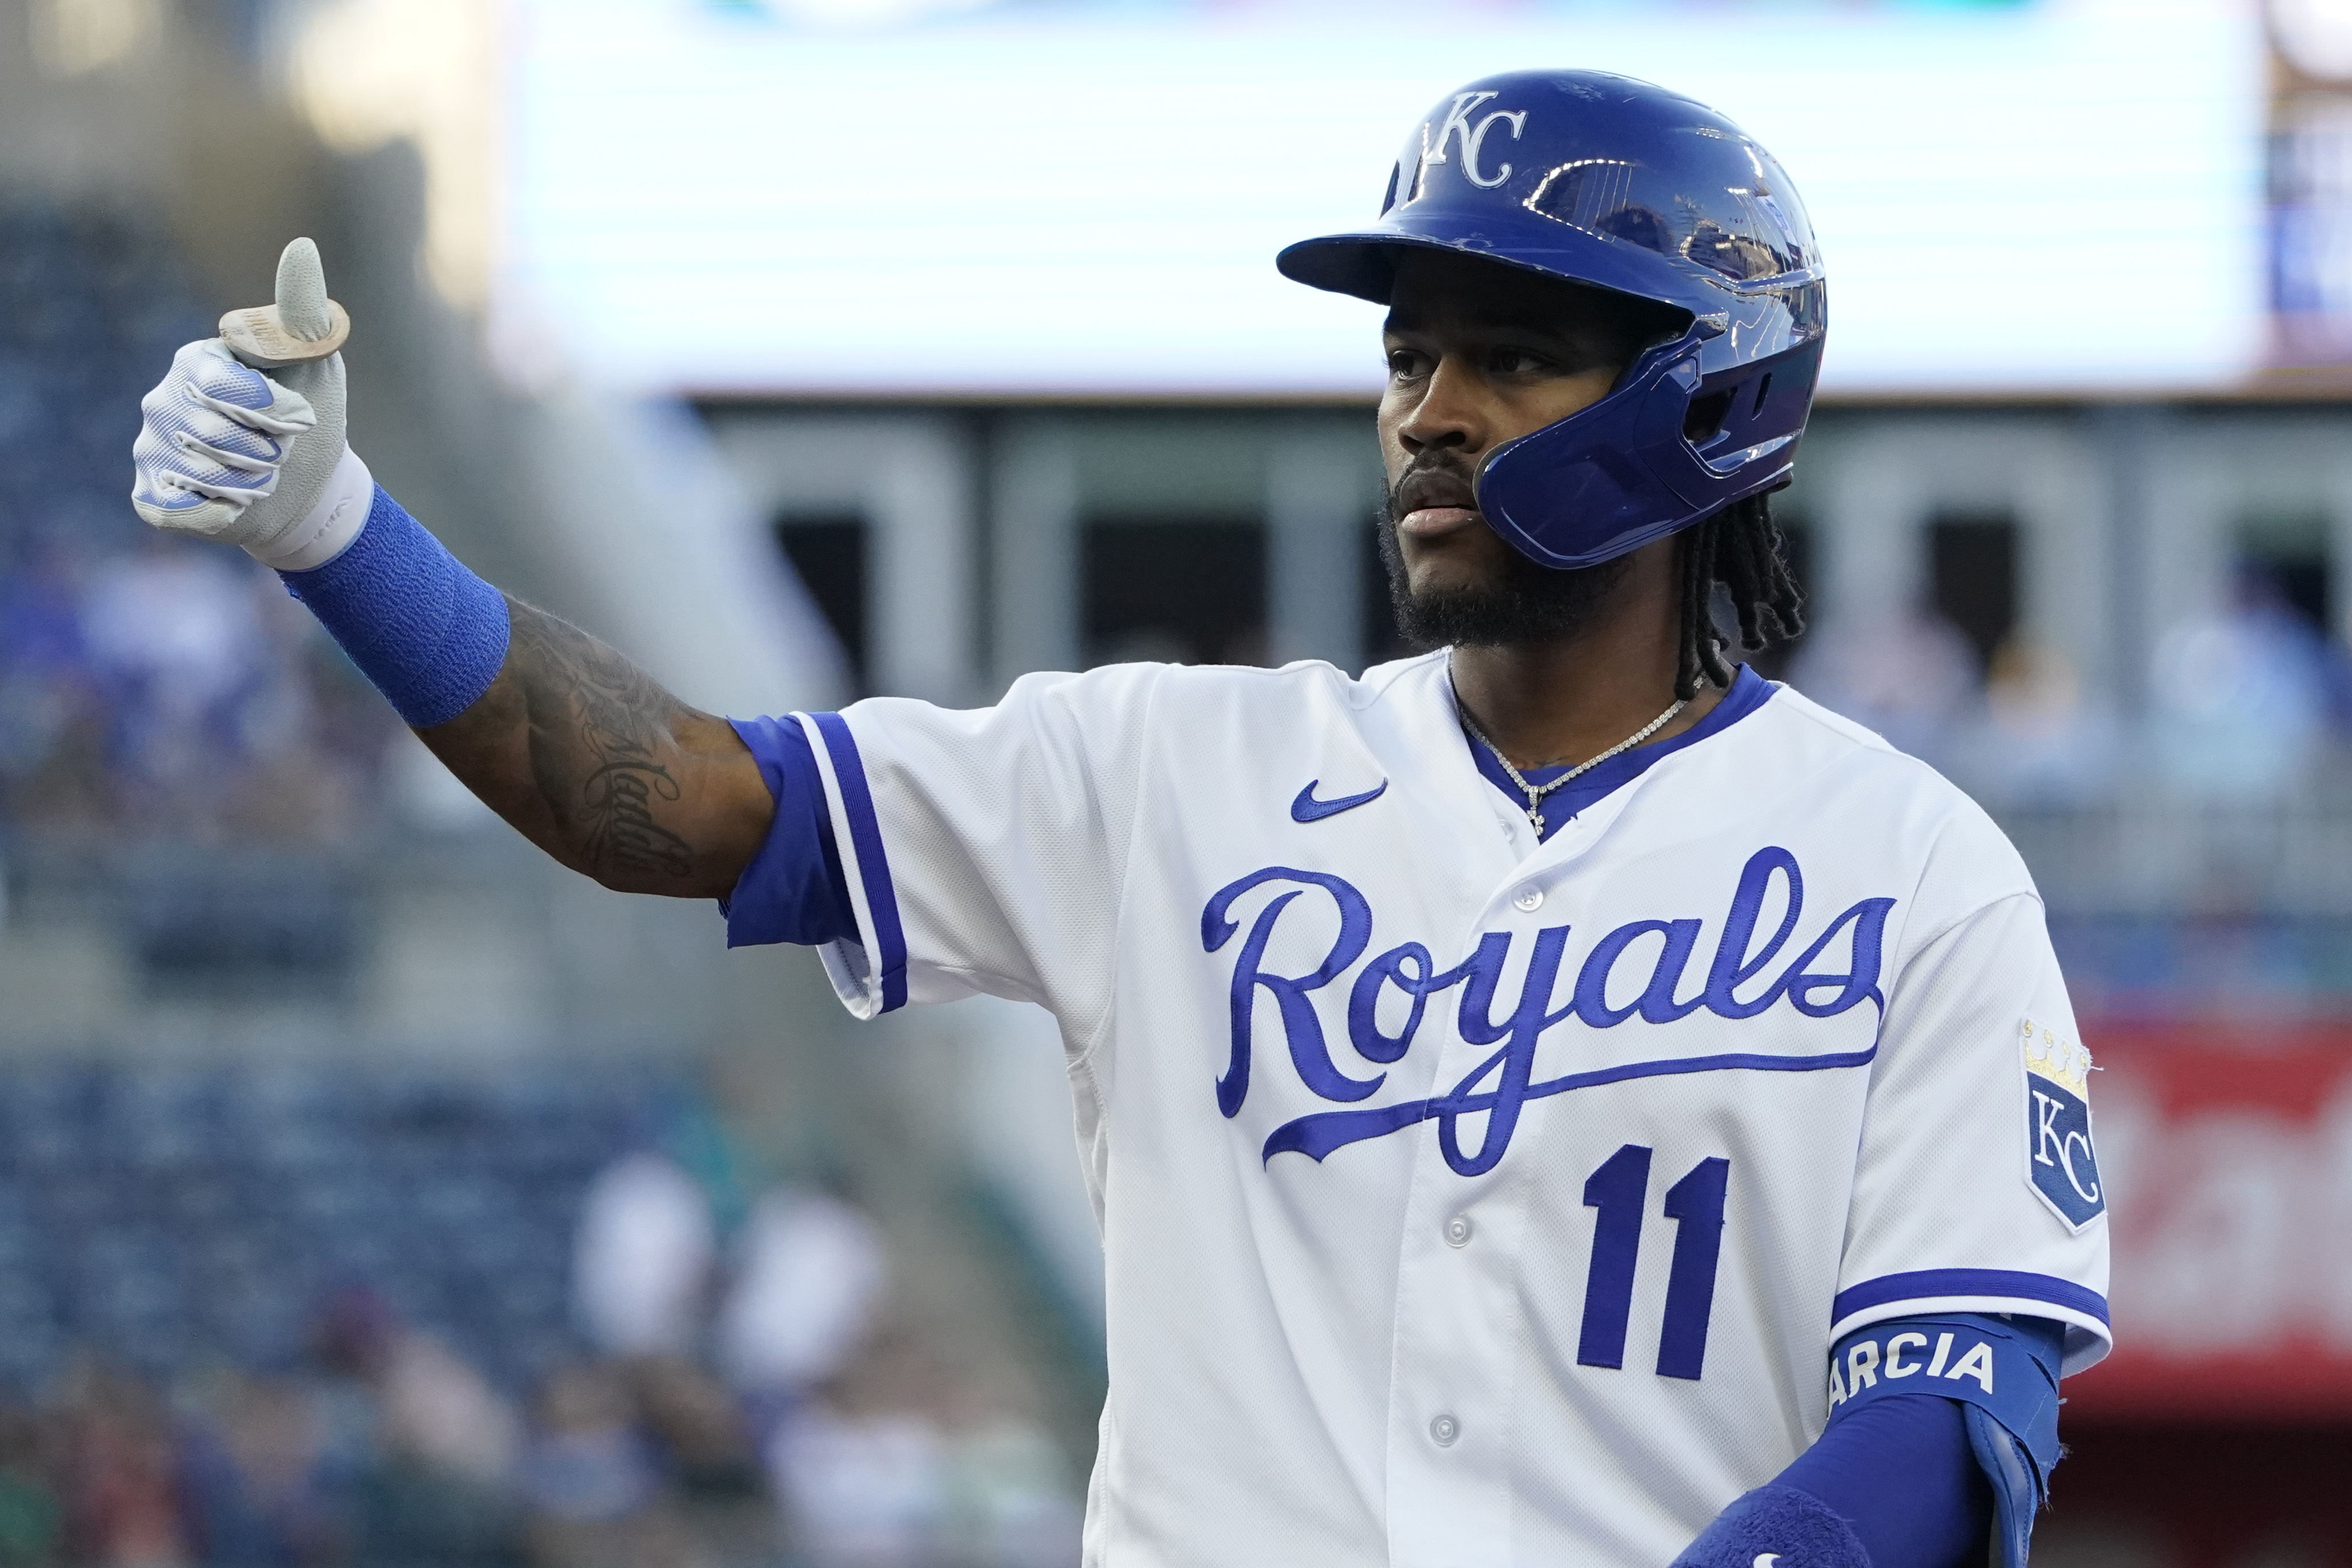 Royals share update on Pasquantino's surgery